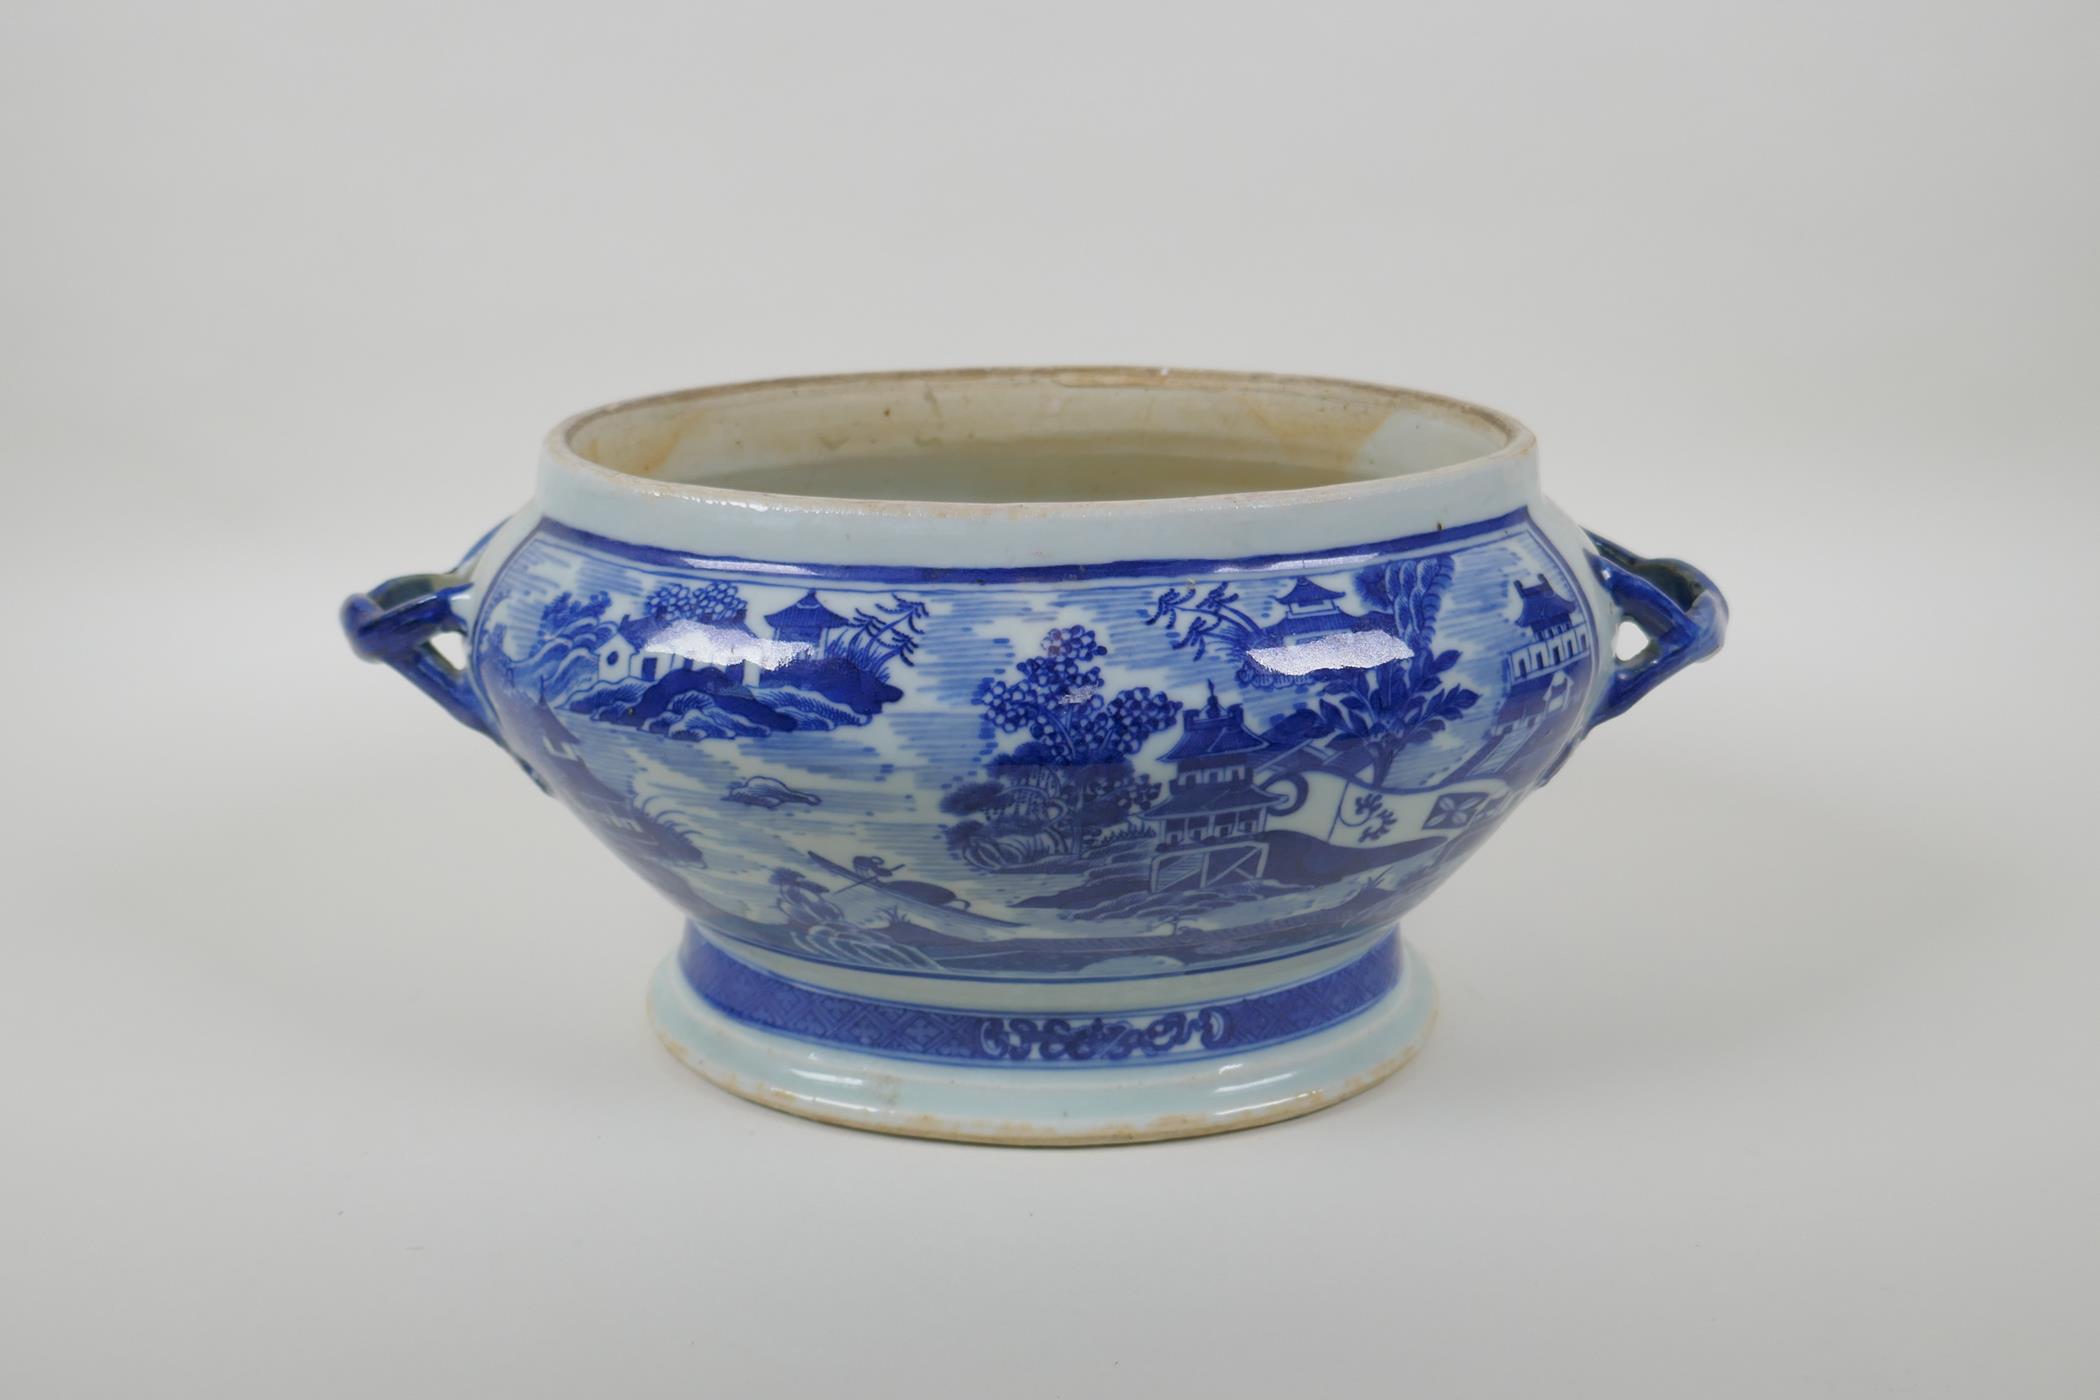 A C19th Chinese export blue and white porcelain two handled oval planter with decorative riverside